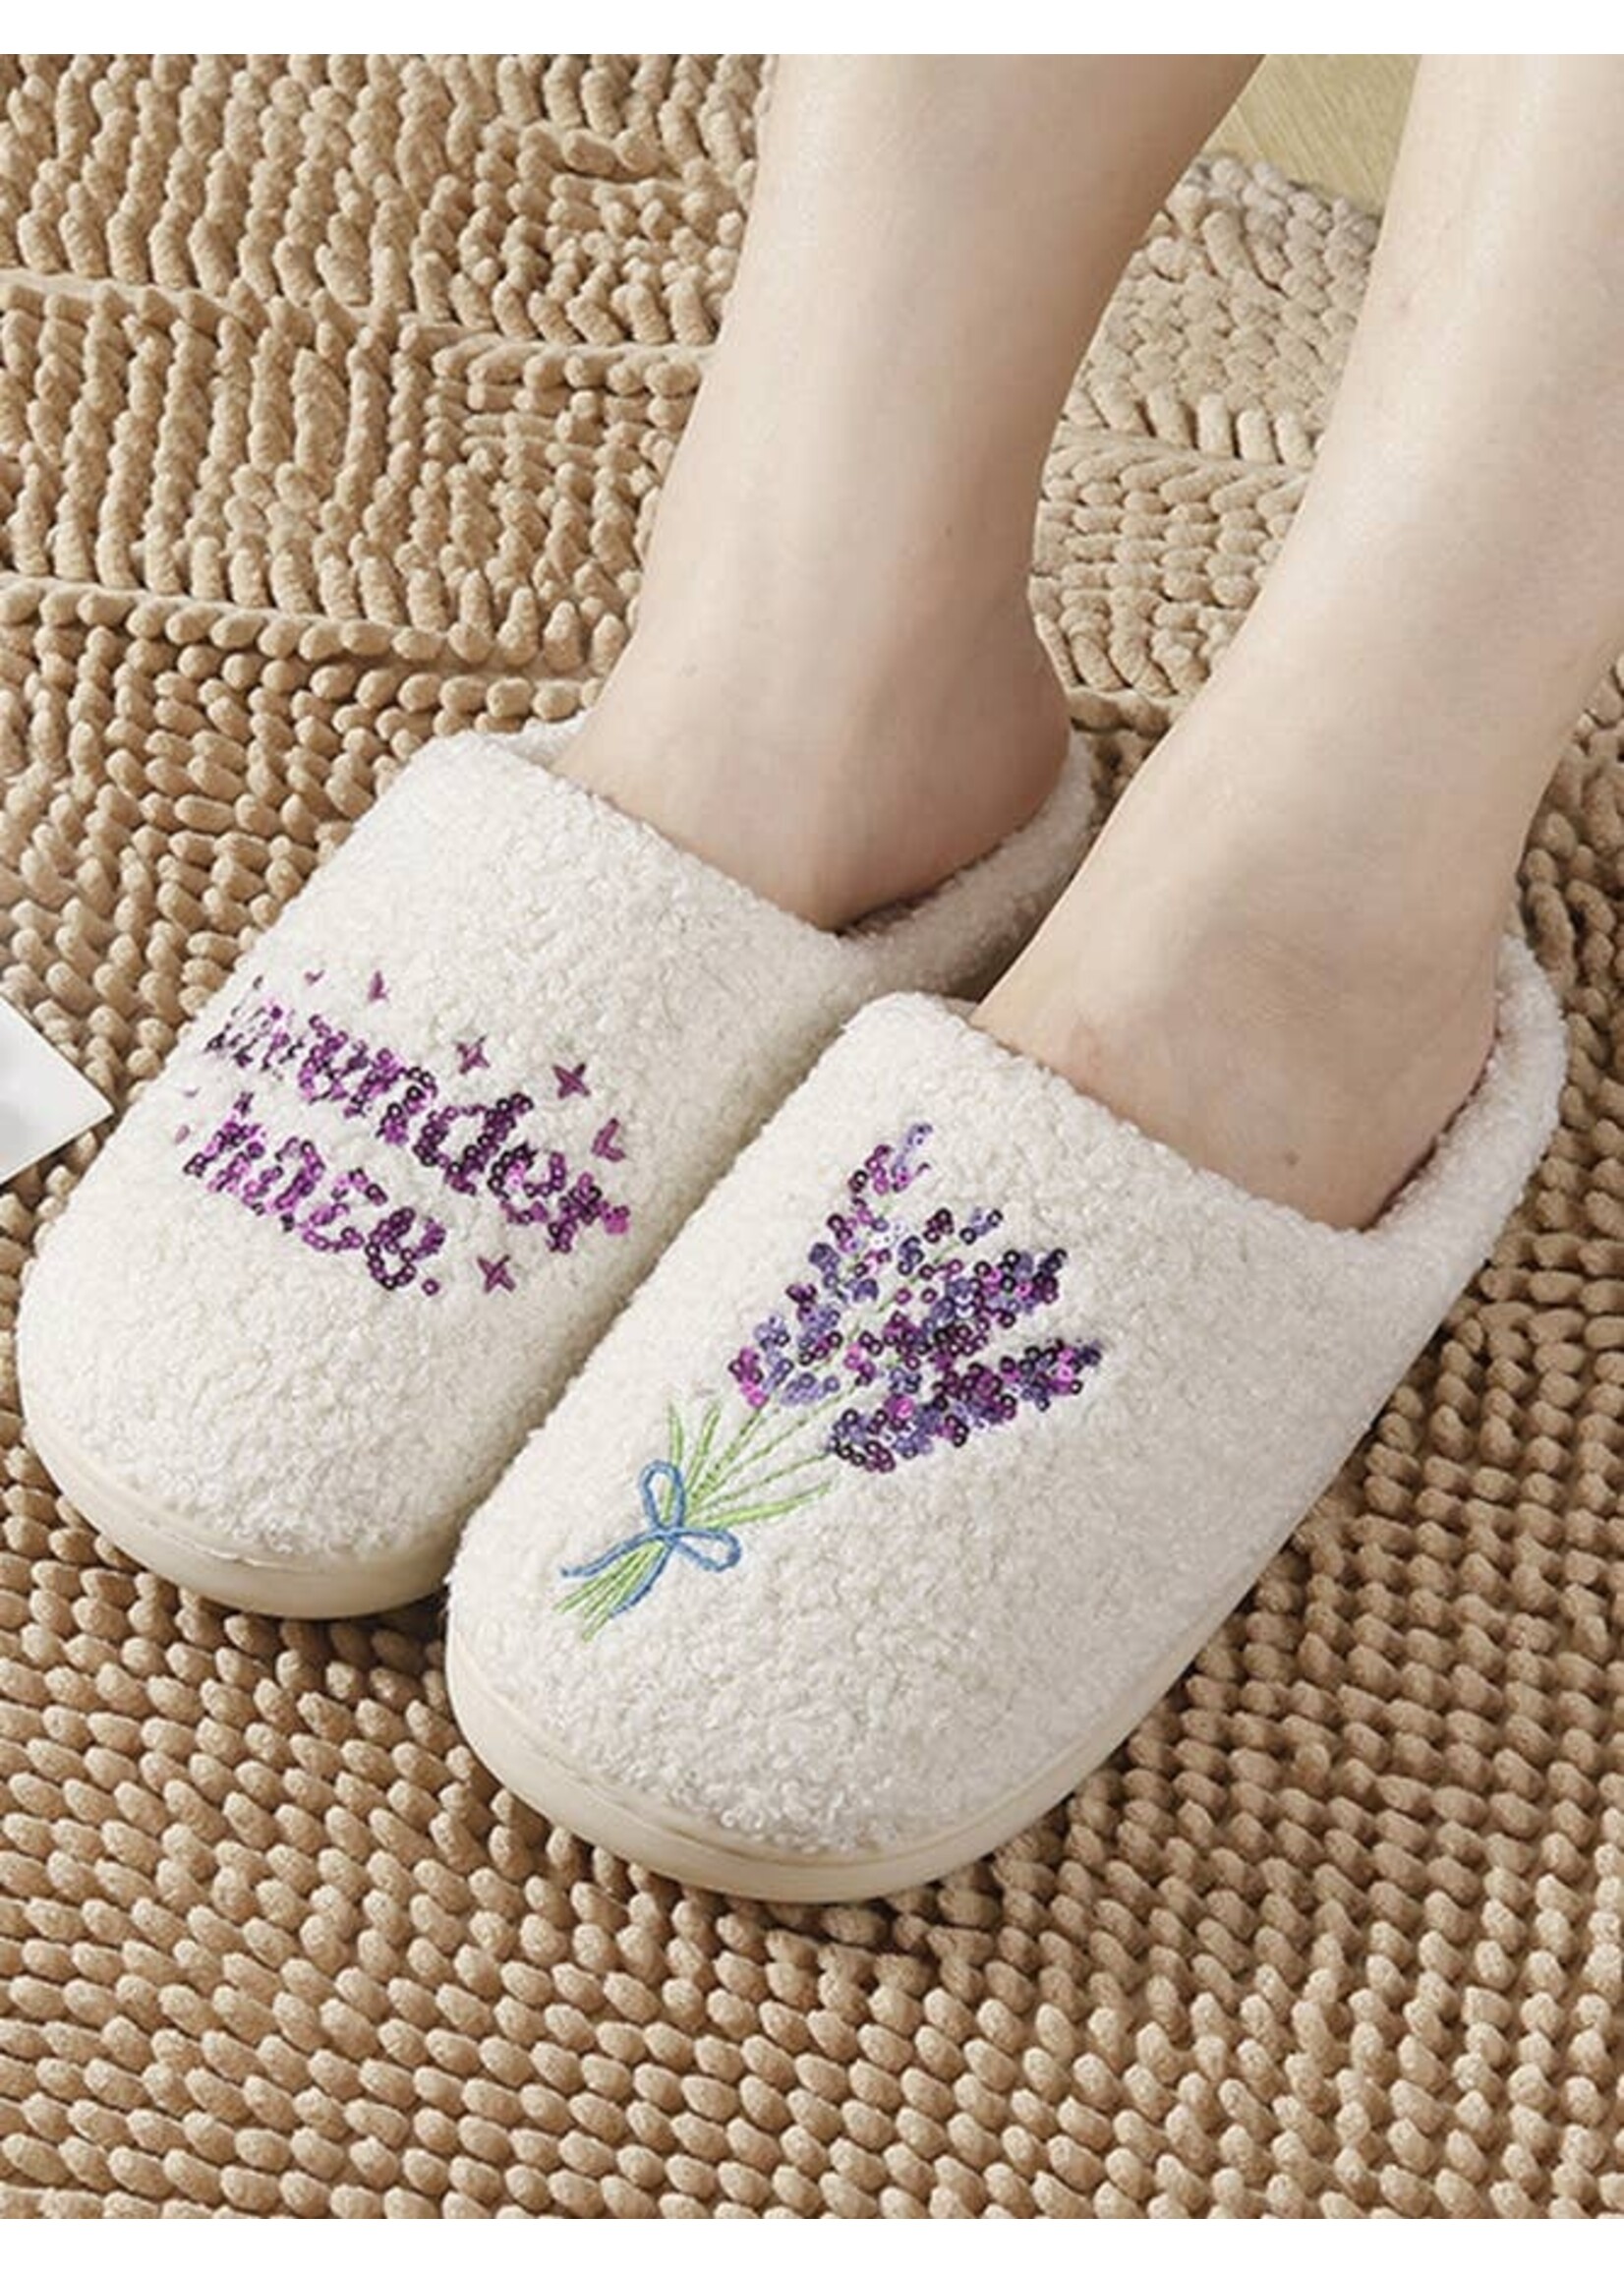 Lavender Haze Fleece Slippers Taylor Swiftie - For The Love of Shoes NY